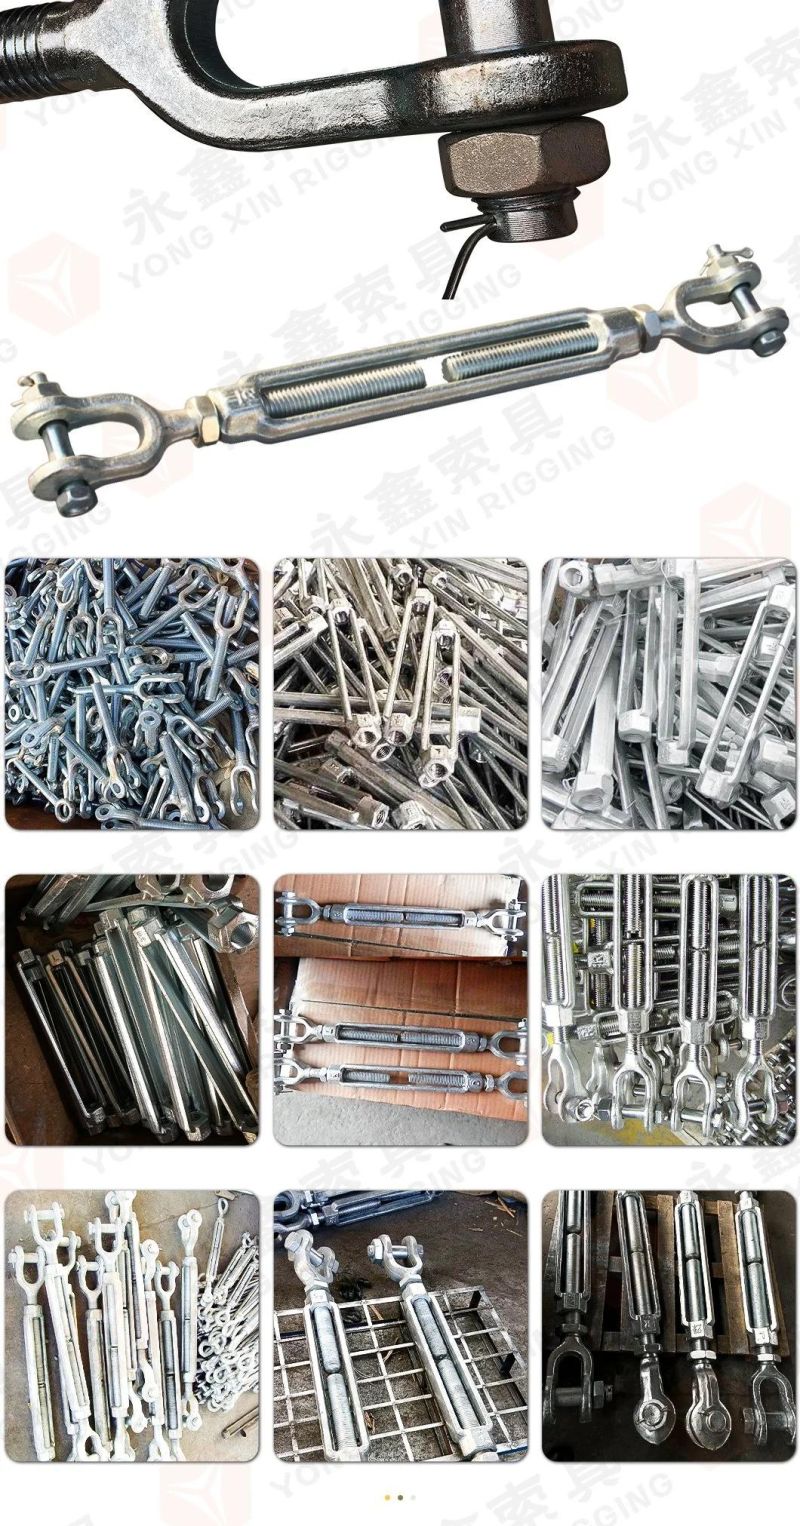 Wire Rope Fittings Marine Hardware High Strength Safety Us Type Hot DIP Galvanized Carbon Steel Drop Forged Jaw & Jaw Turnbuckle